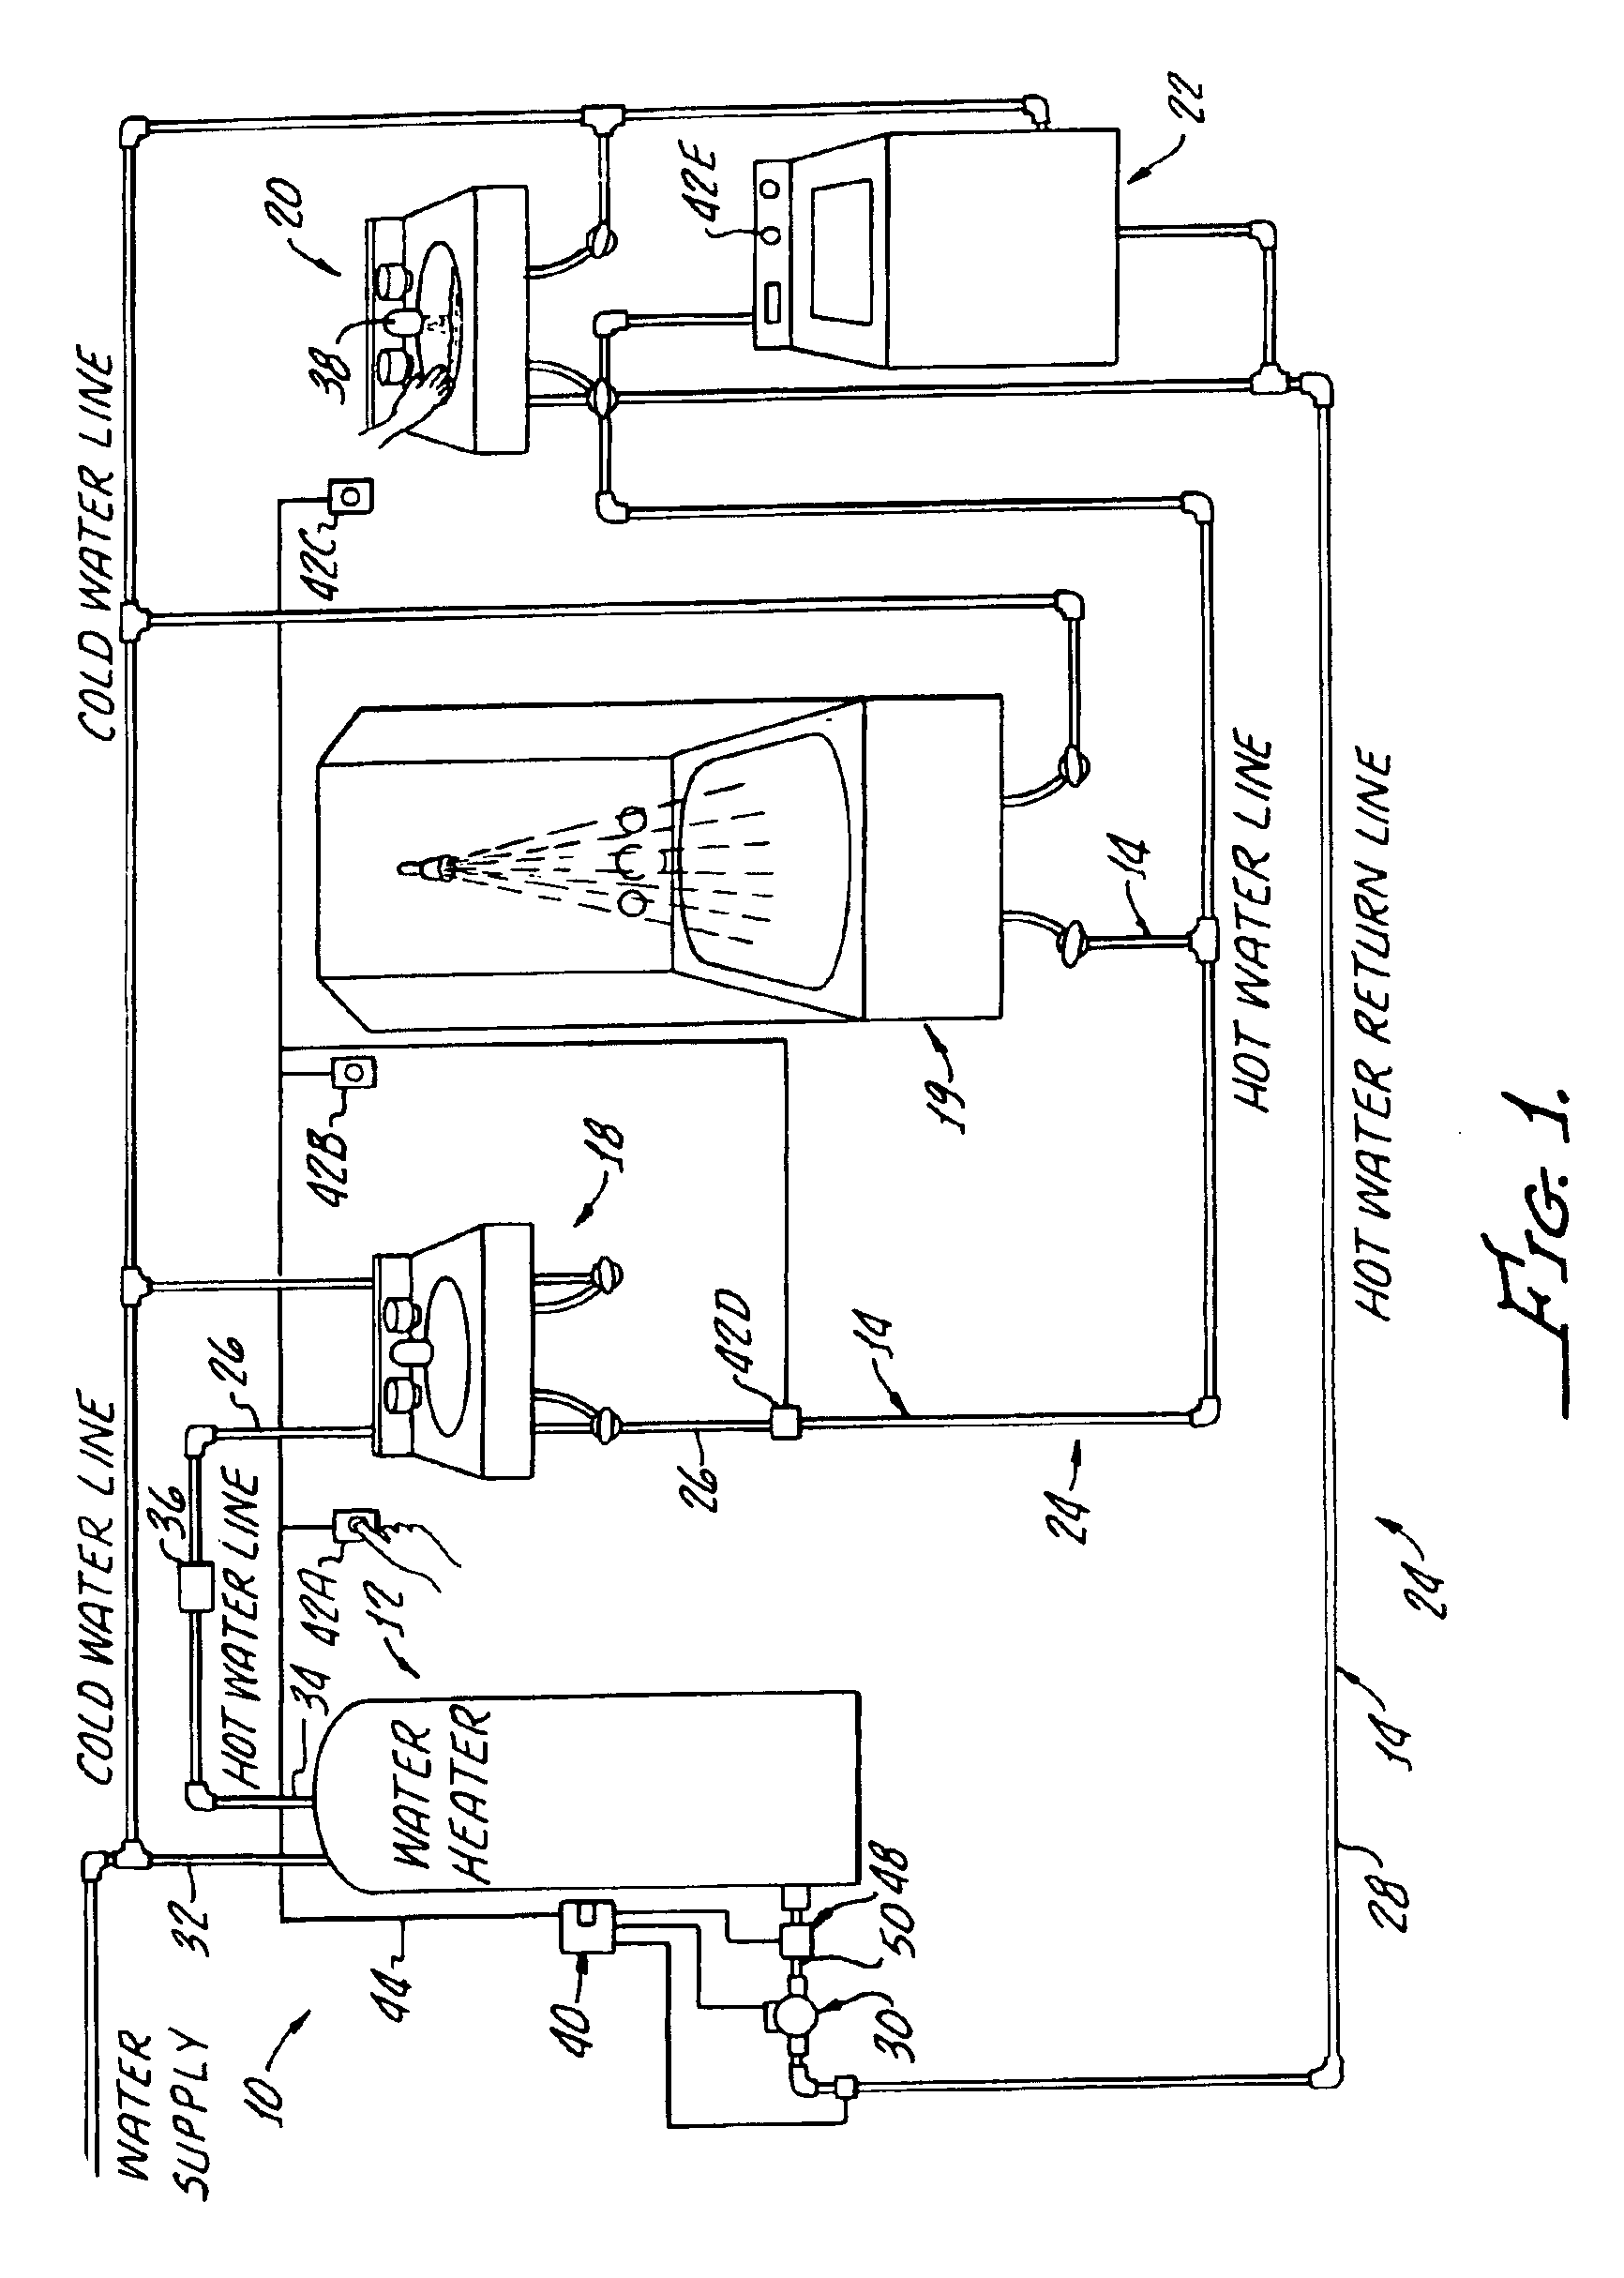 Method for operating a multi family/commercial plumbing system